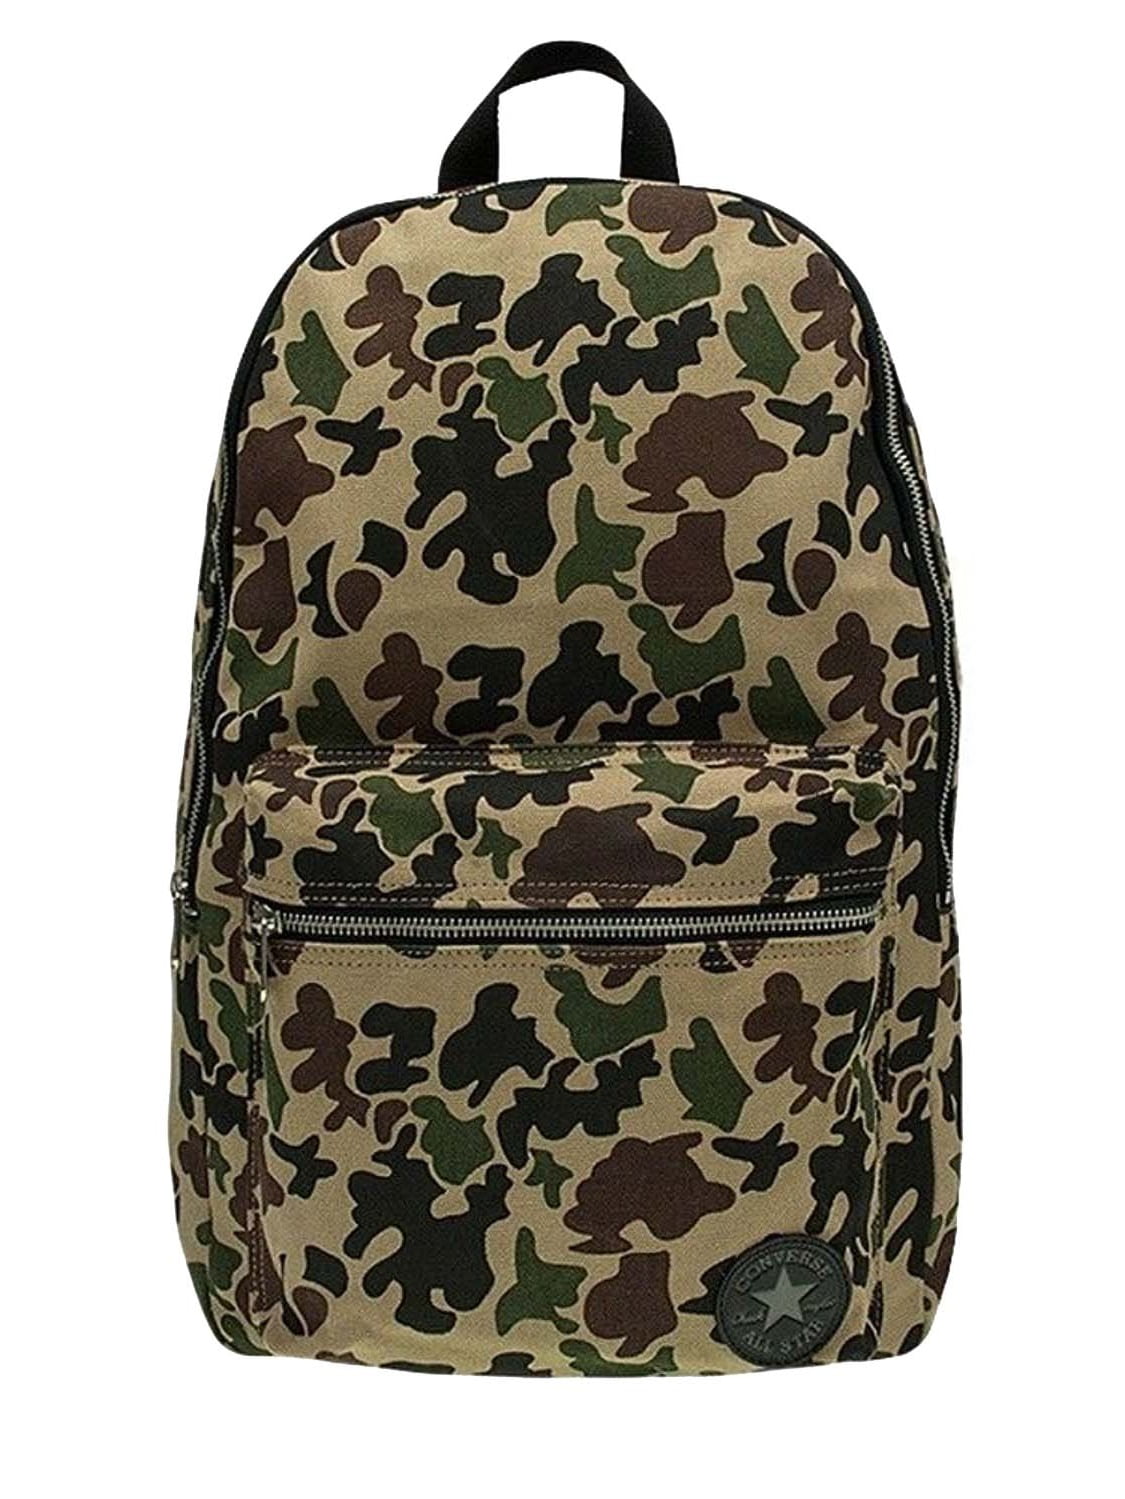 converse camouflage backpack